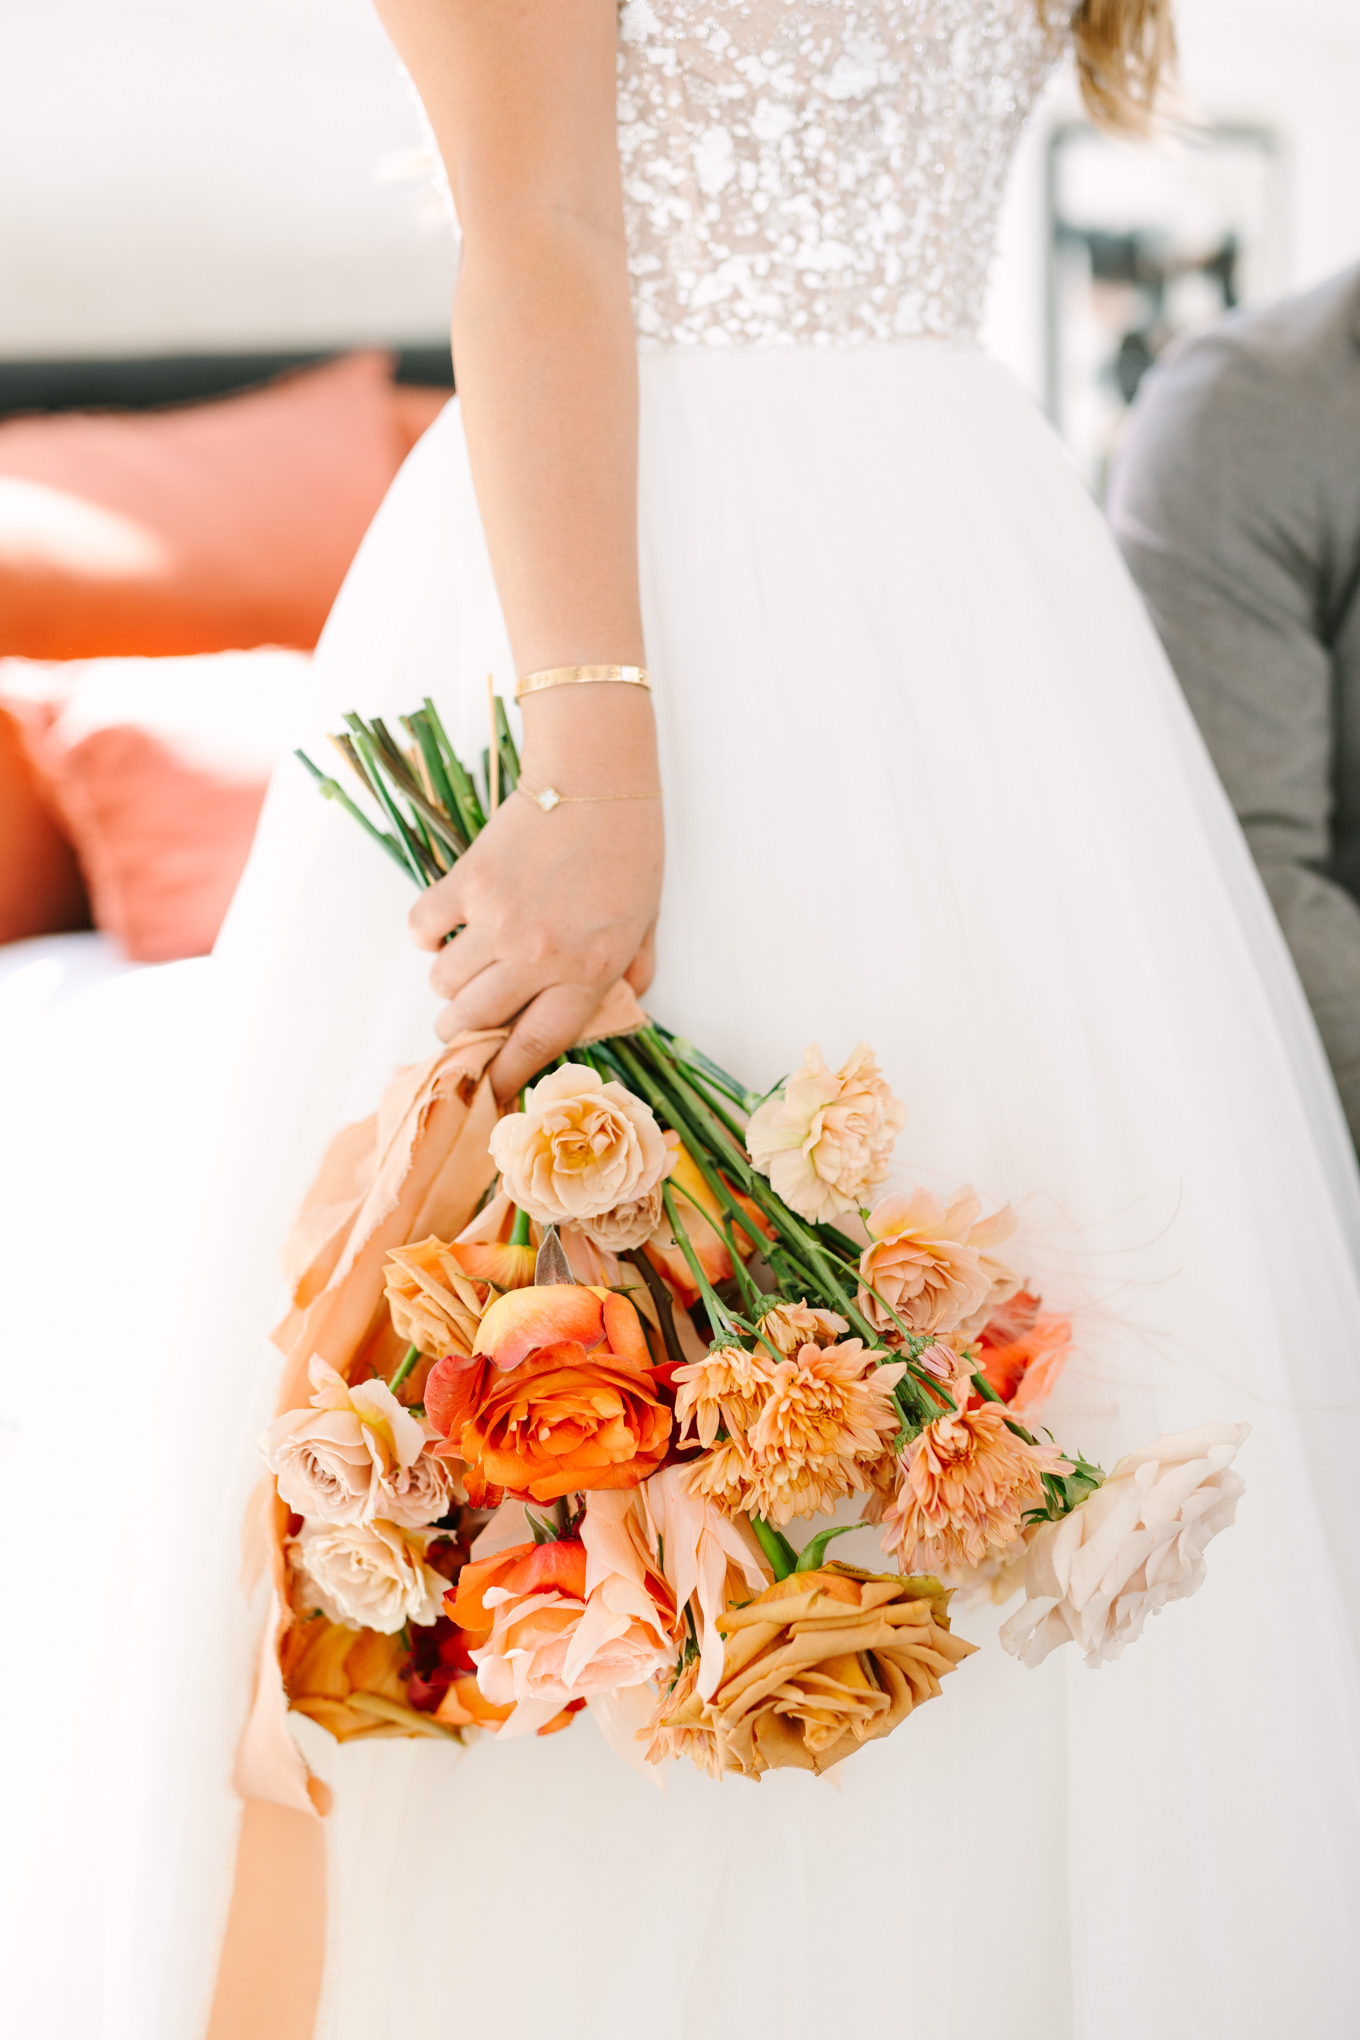 Orange and peach bridal bouquet | Pink and orange Lautner Compound wedding | Colorful Palm Springs wedding photography | #palmspringsphotographer #palmspringswedding #lautnercompound #southerncaliforniawedding  Source: Mary Costa Photography | Los Angeles